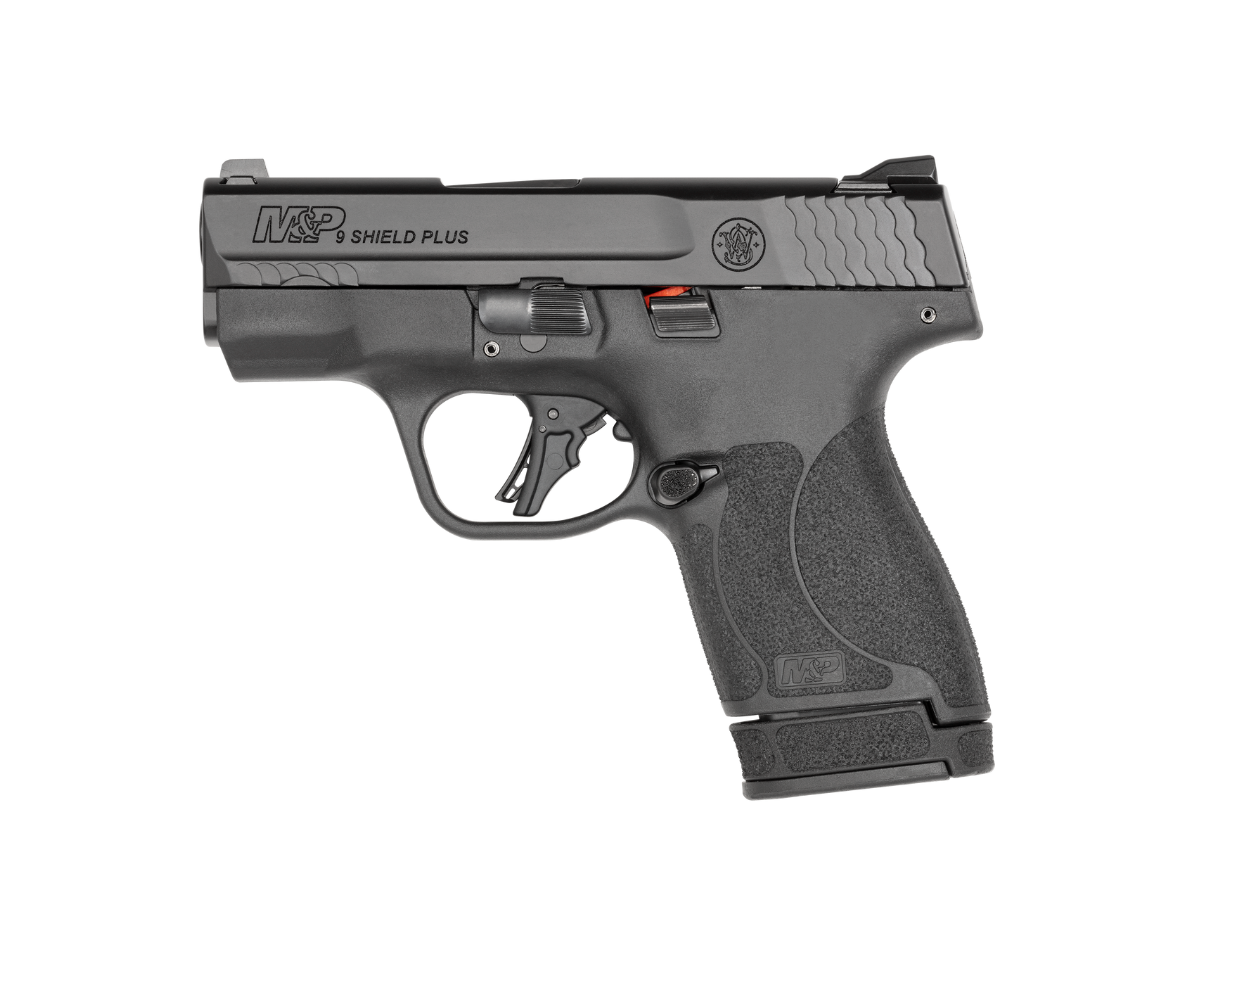 Smith & Wesson M&P 9 SHIELD PLUS - Scopes and Barrels